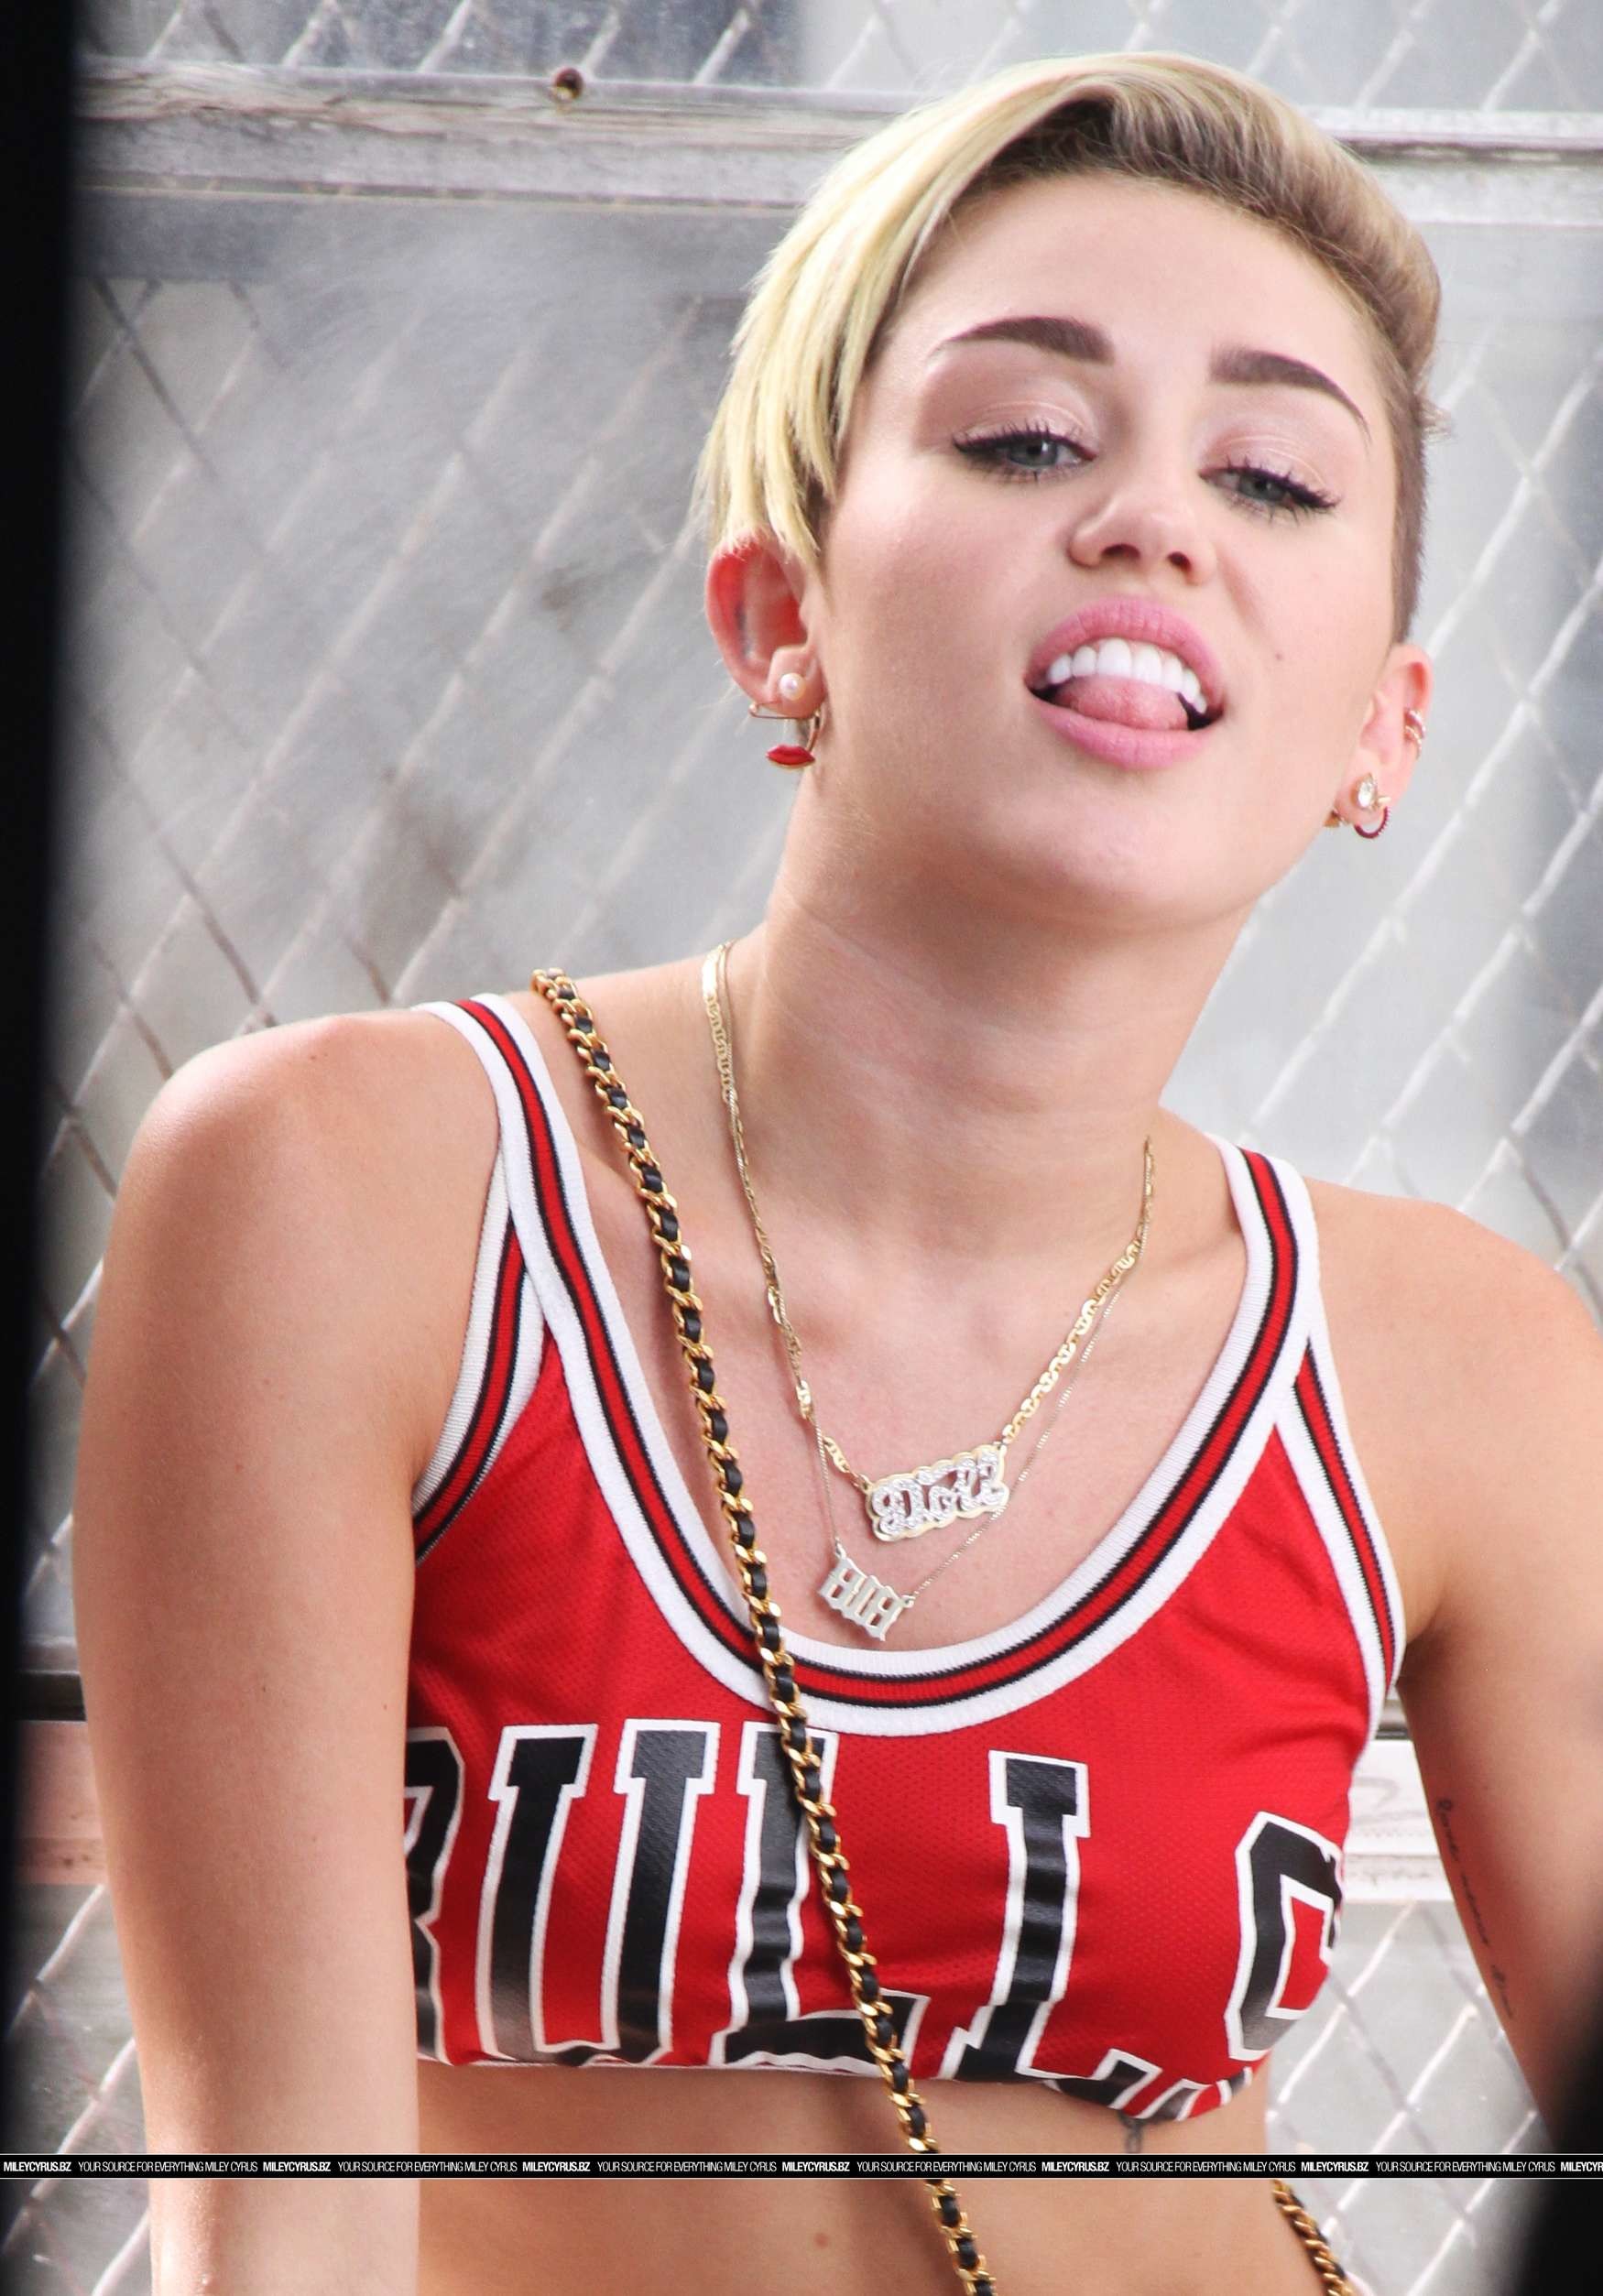 Miley Cyrus HQ Wallpapers  Miley Cyrus Wallpapers  18094  Oneindia  Wallpapers